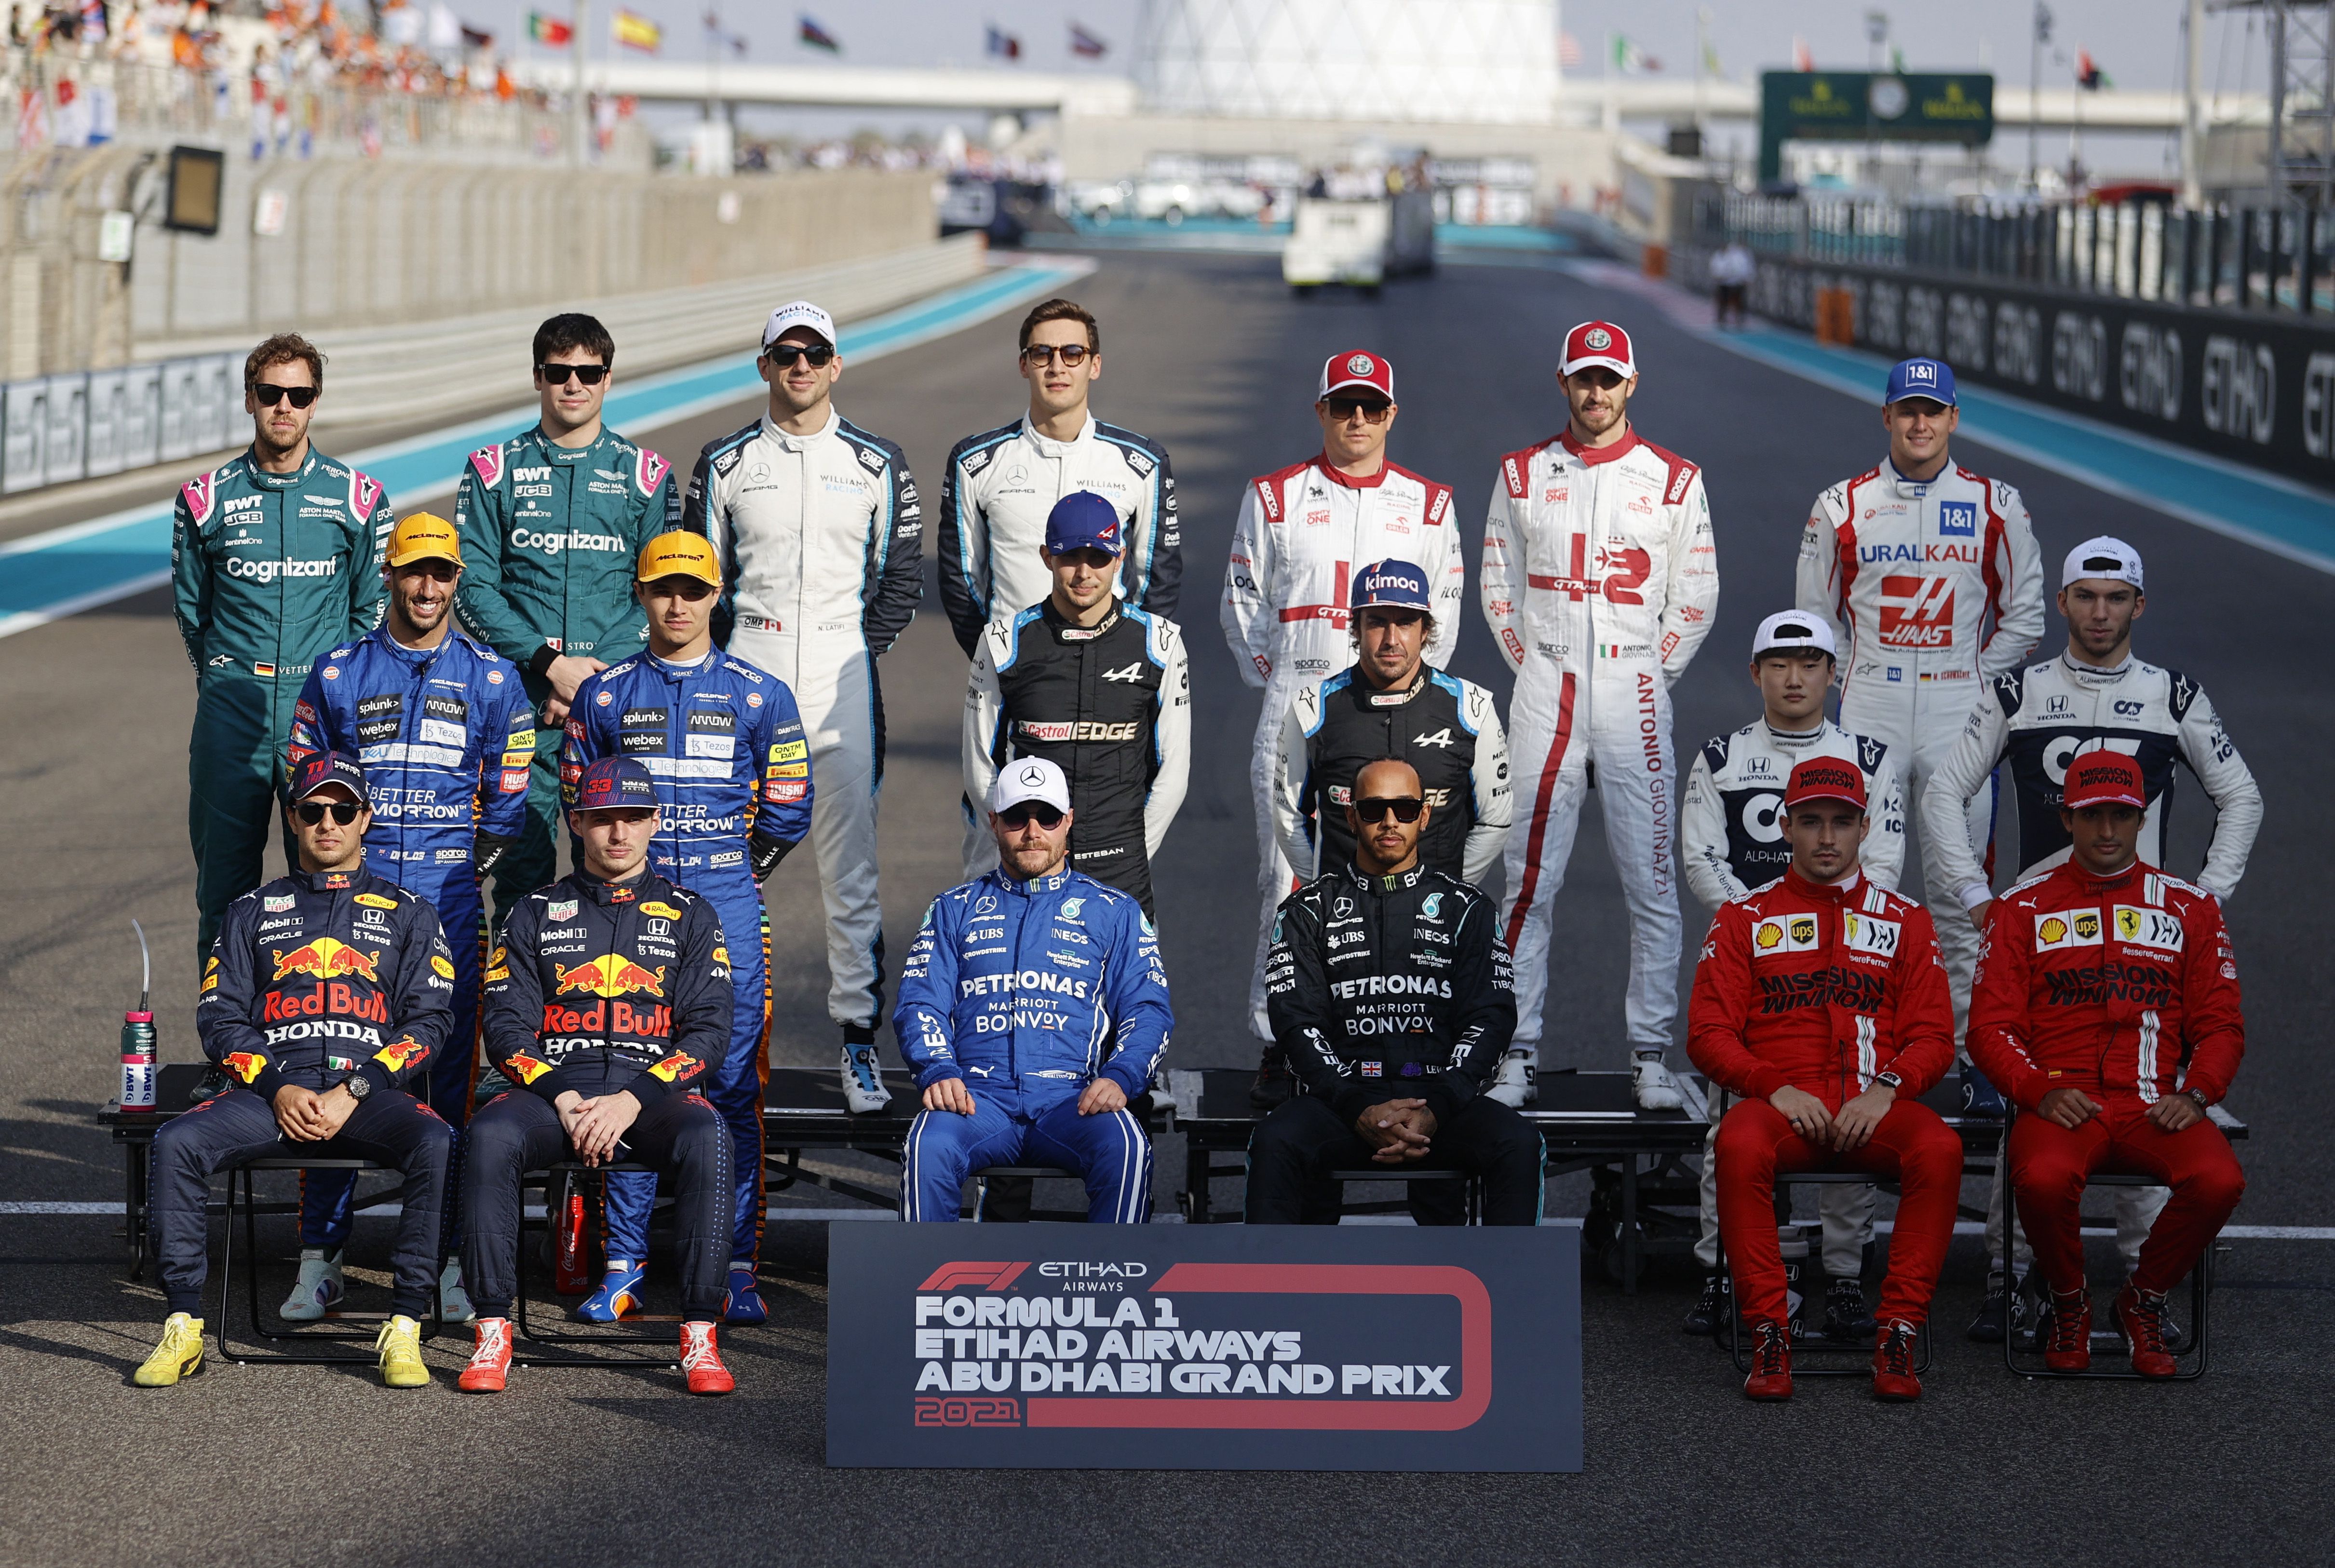 The photo of the drivers before the race 